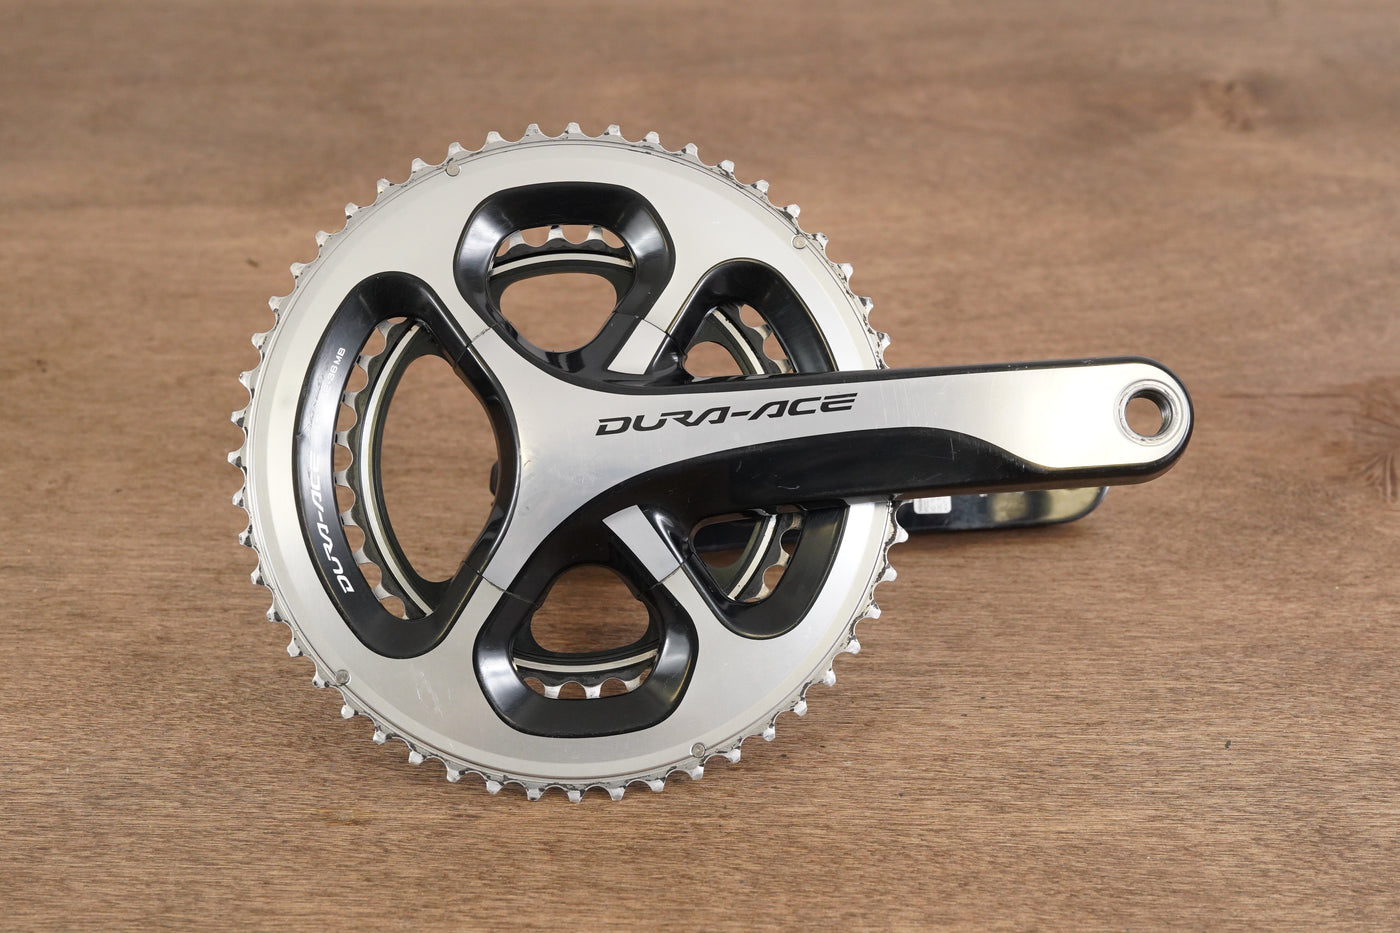 175mm 52/36T Shimano FC-9000 Stages 11 Speed Power Meter Crankset